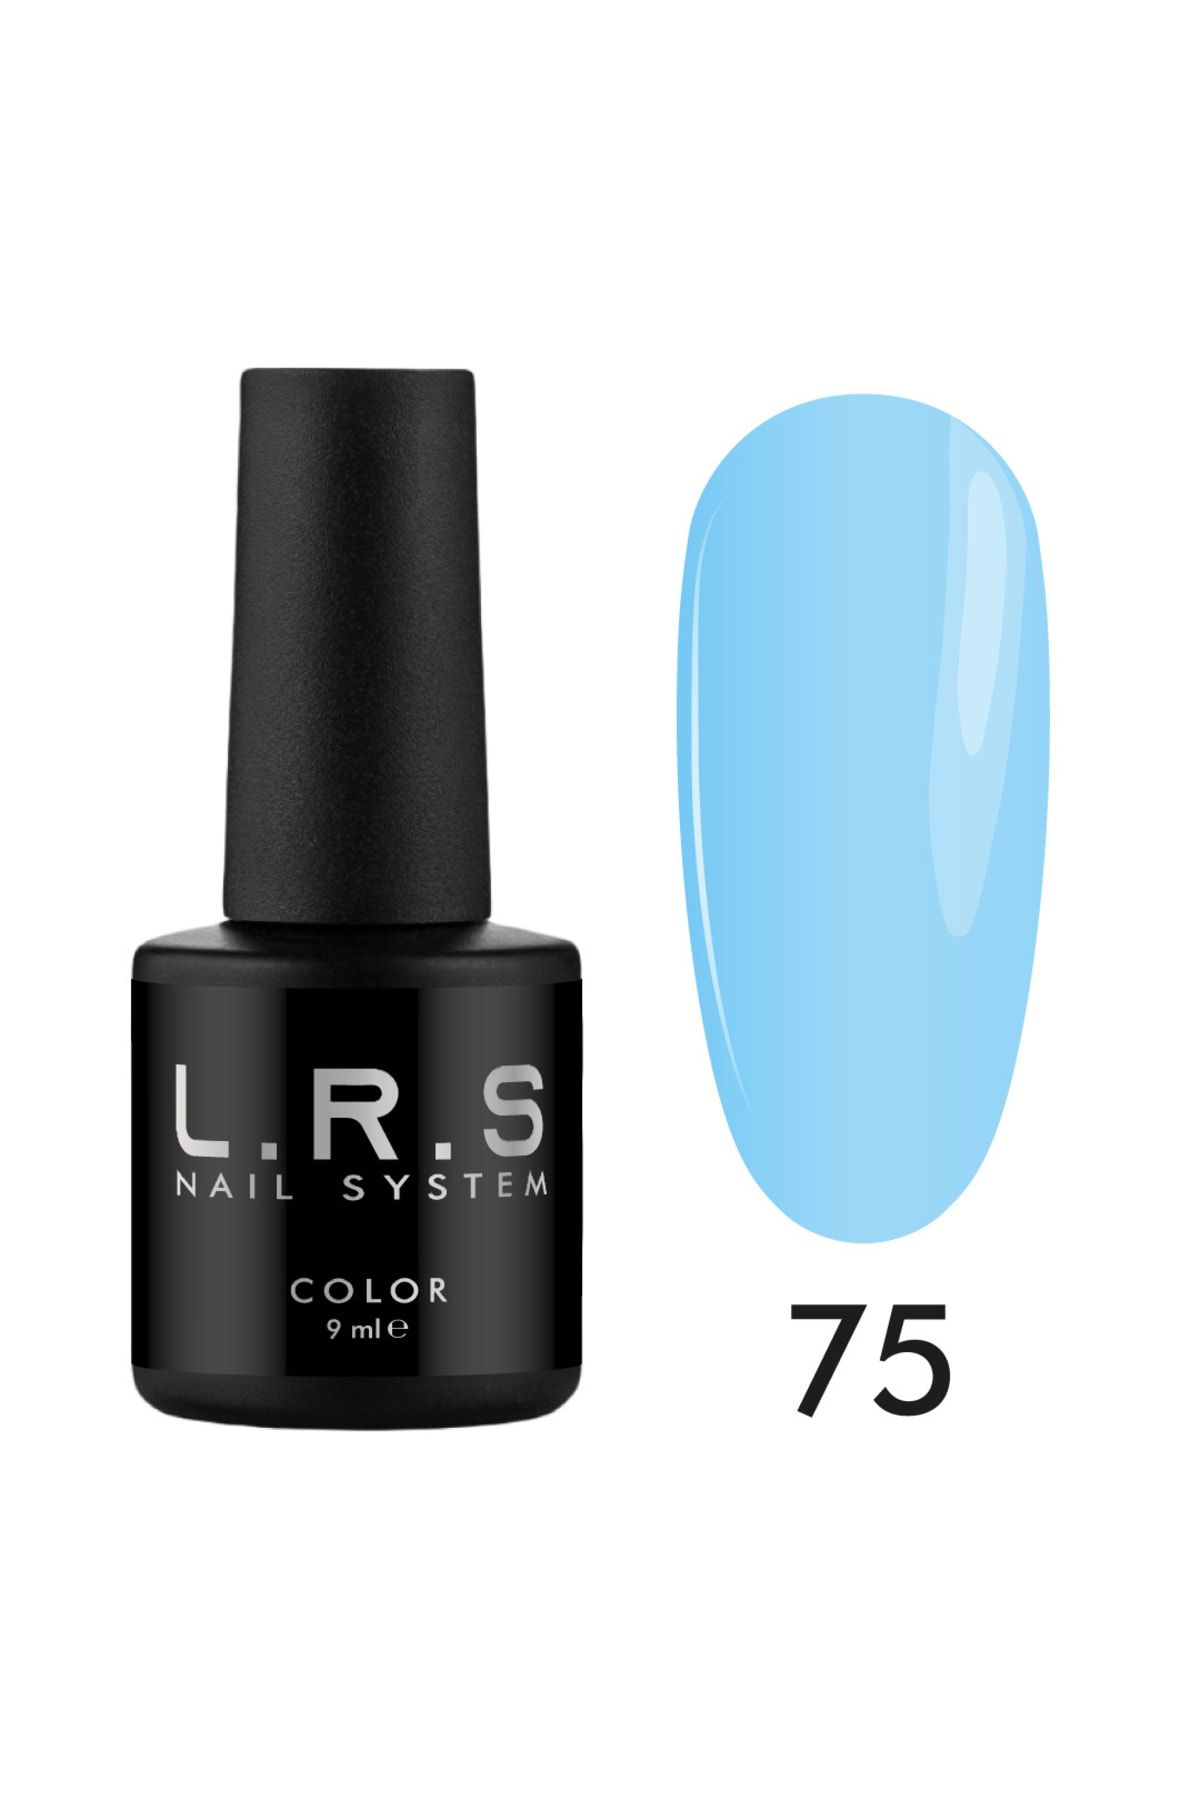 PNB Lrs Nail System 9ml Color 75